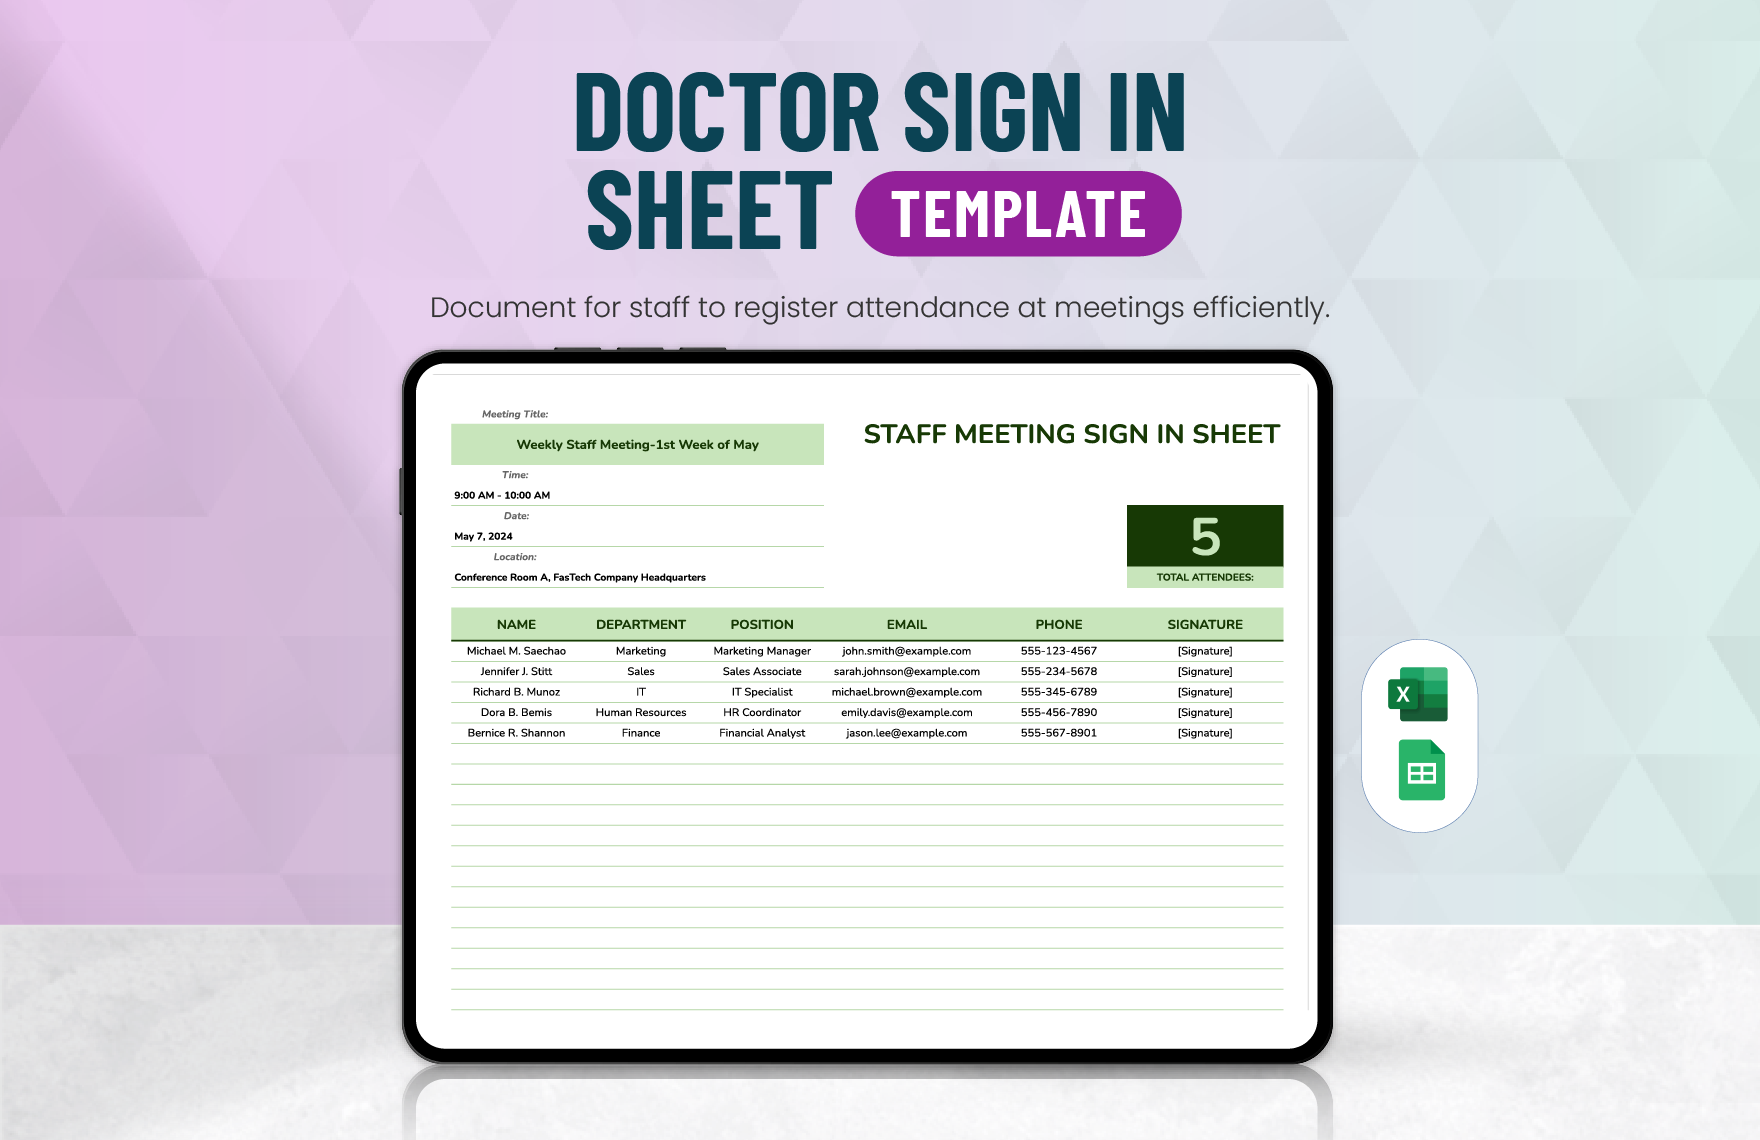 Staff Meeting Sign in Sheet Template in Excel, Google Sheets